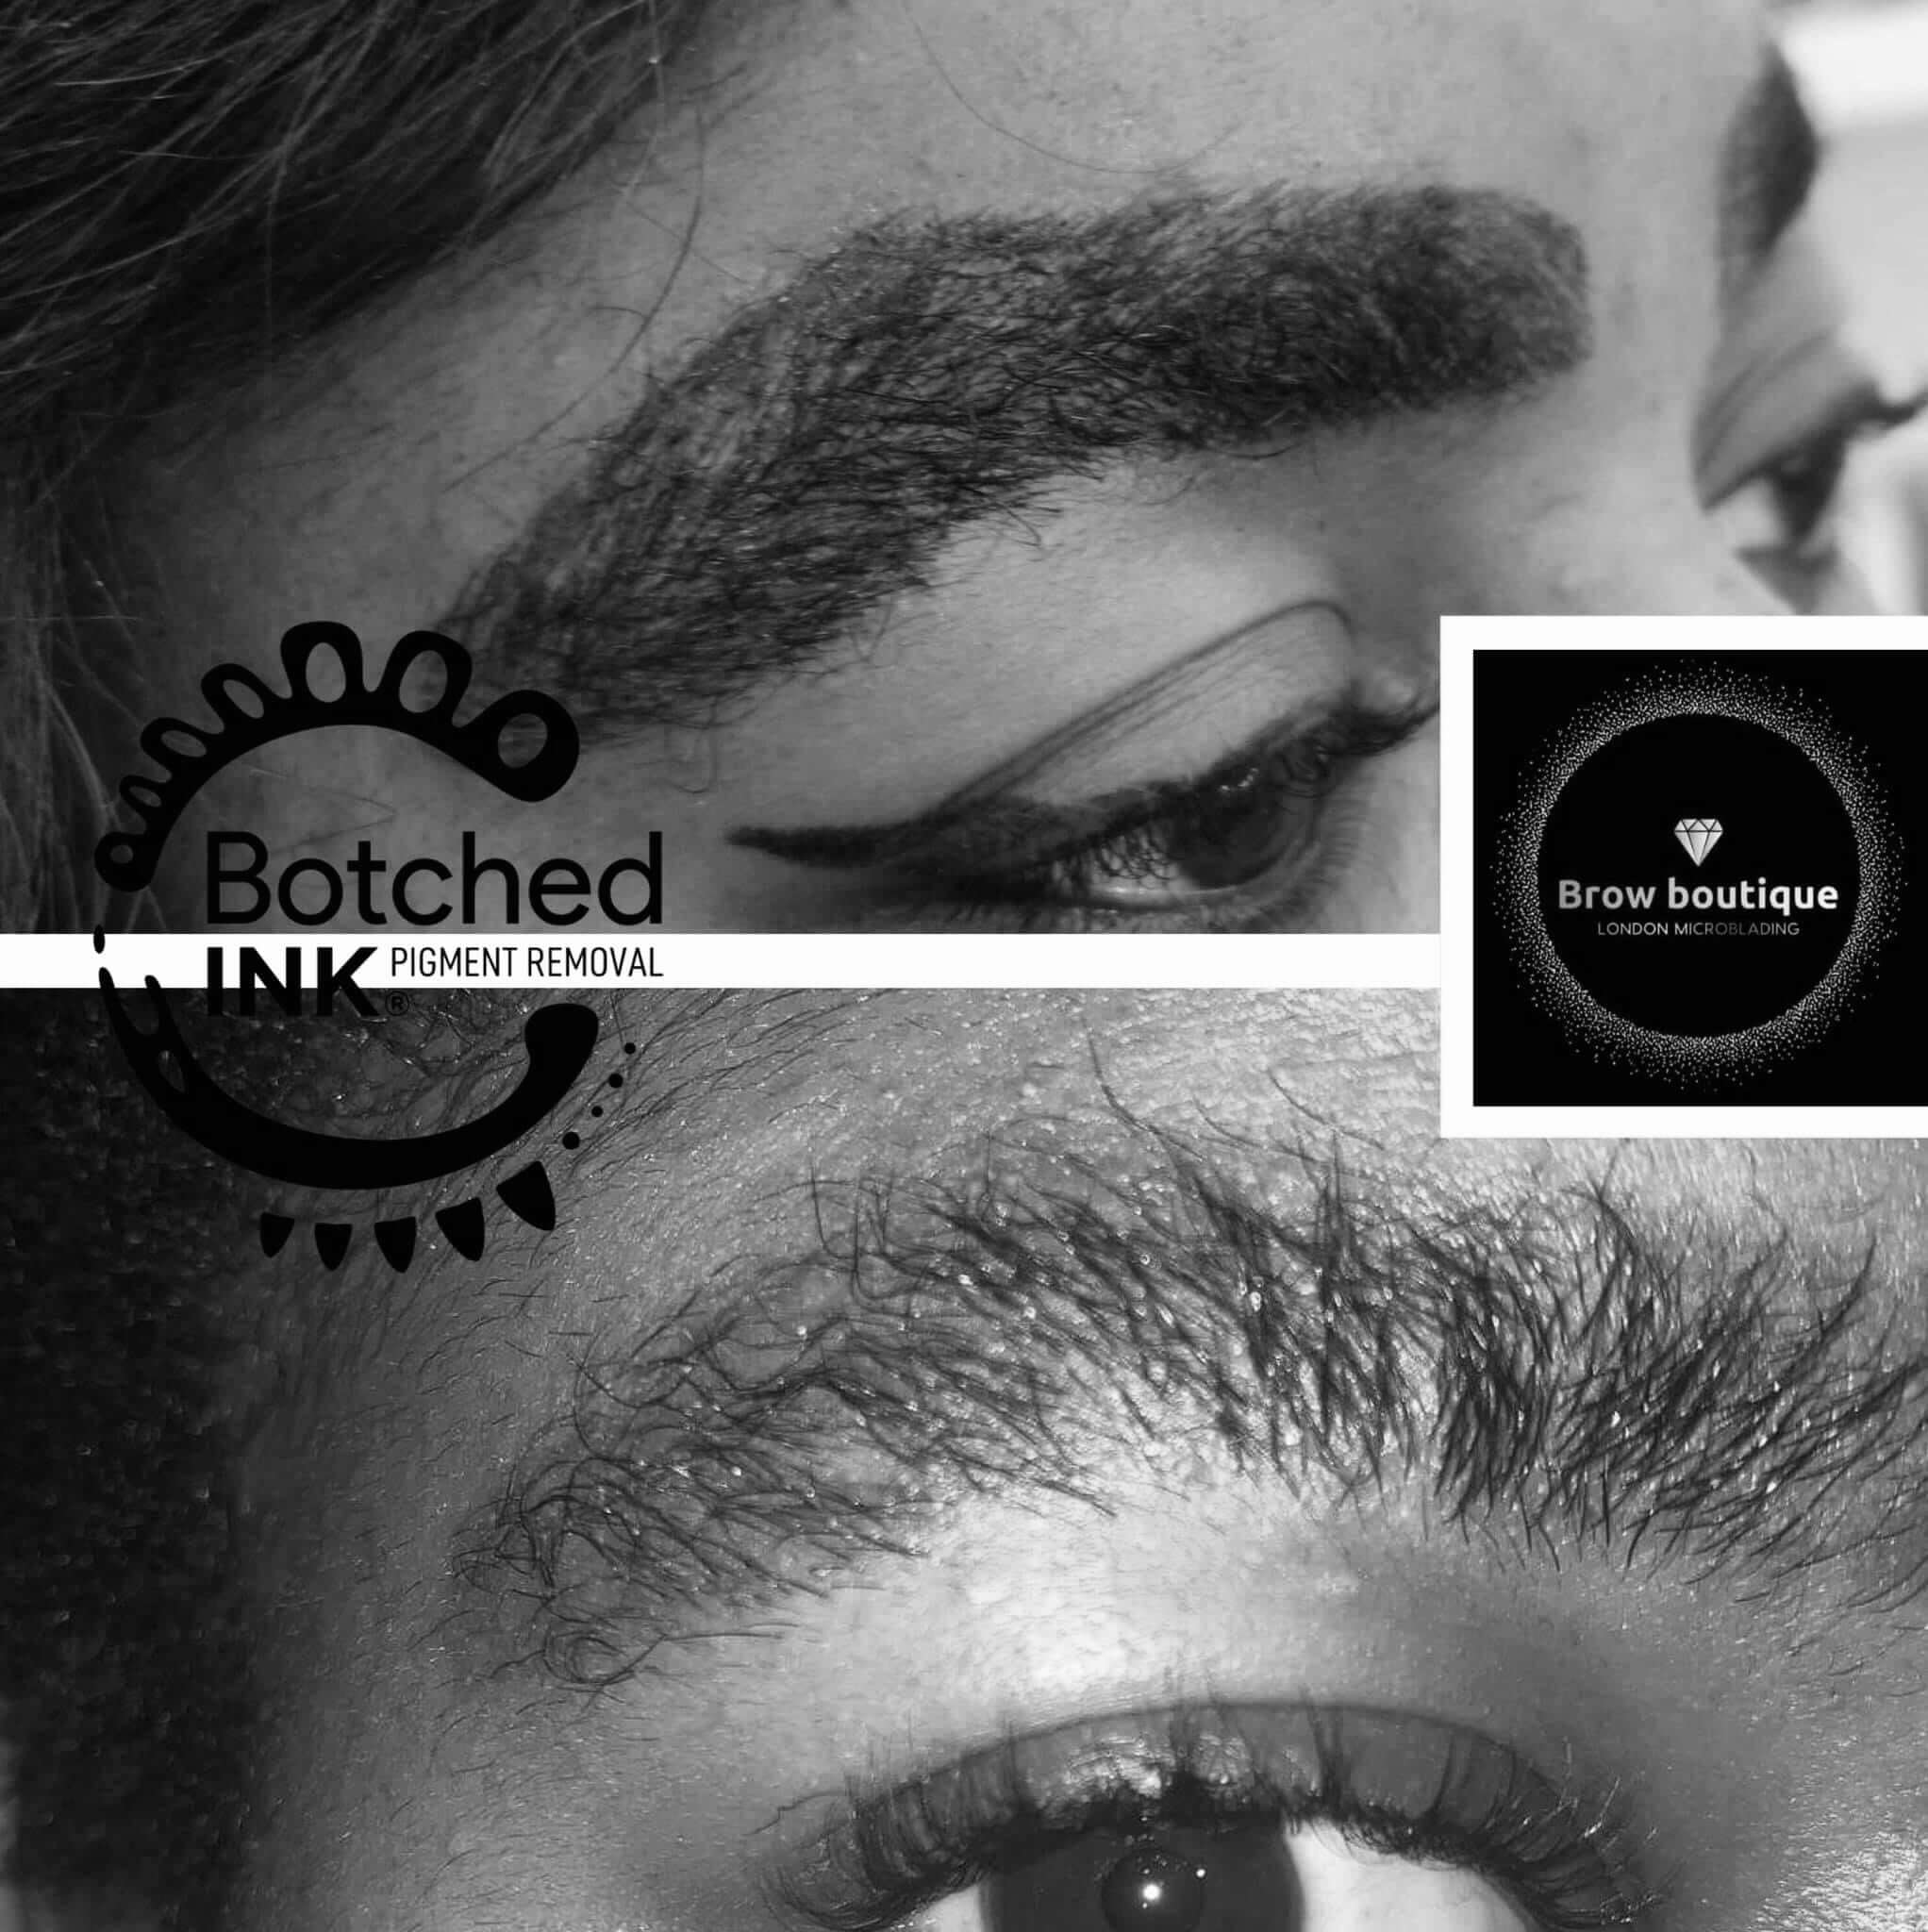 Emergency removal Microblading disaster eyebrow tattoo gone wrong get rid